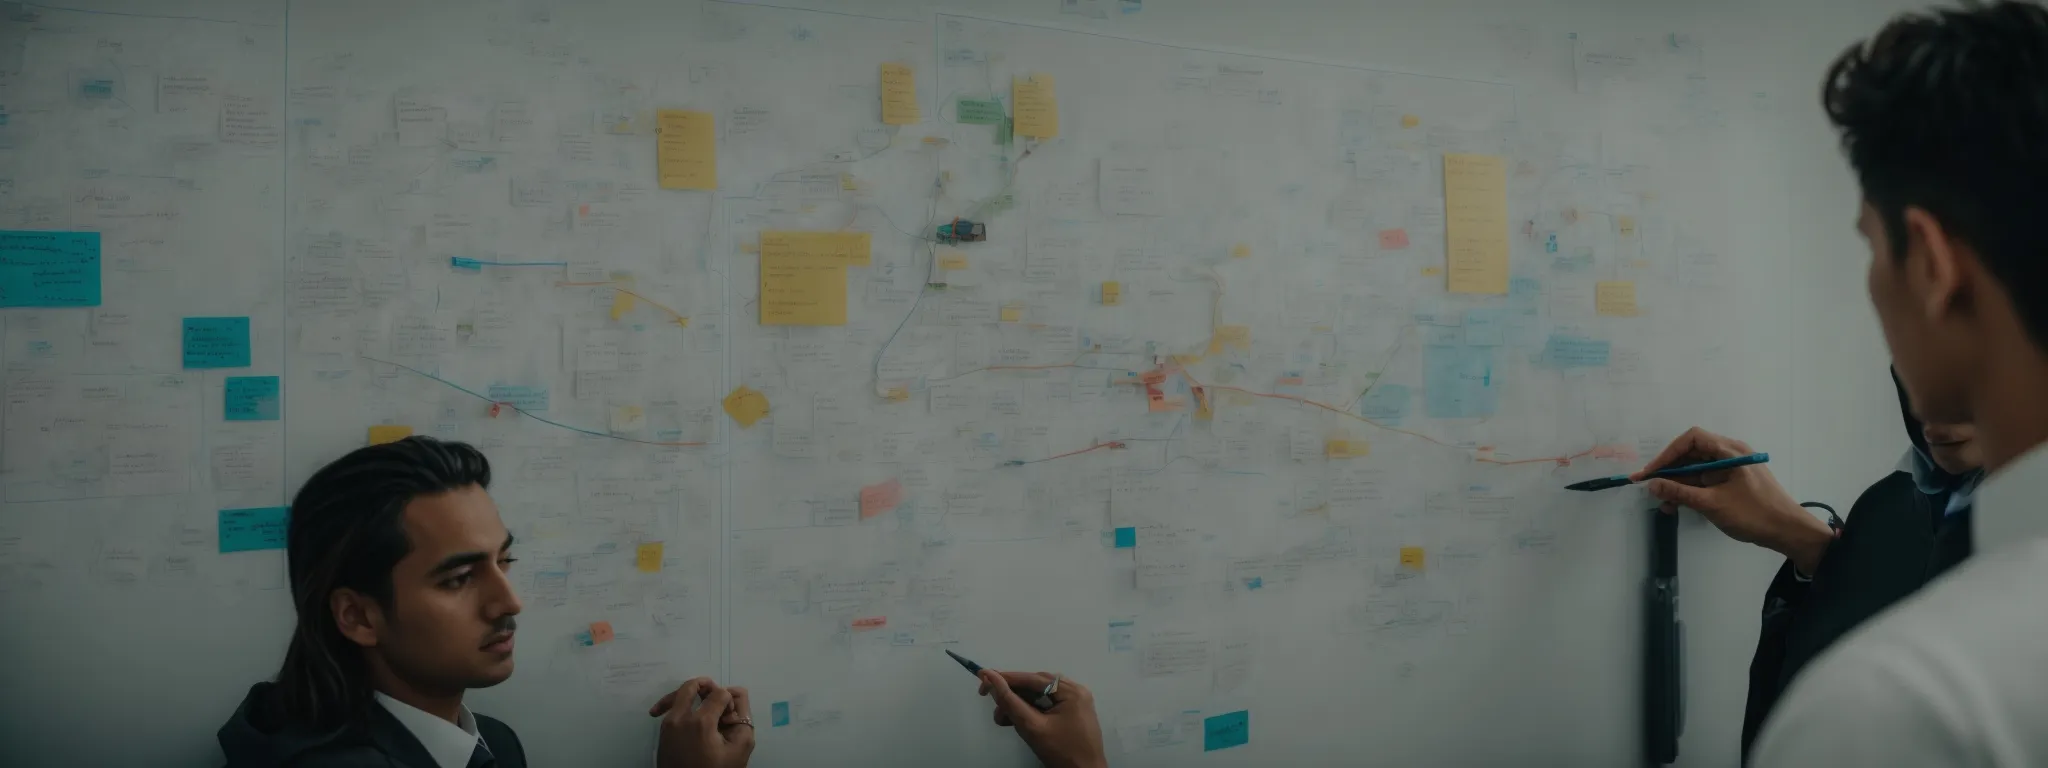 a team analyzes a cluttered and complex diagram on a whiteboard, seeking a clear strategy among the chaos.